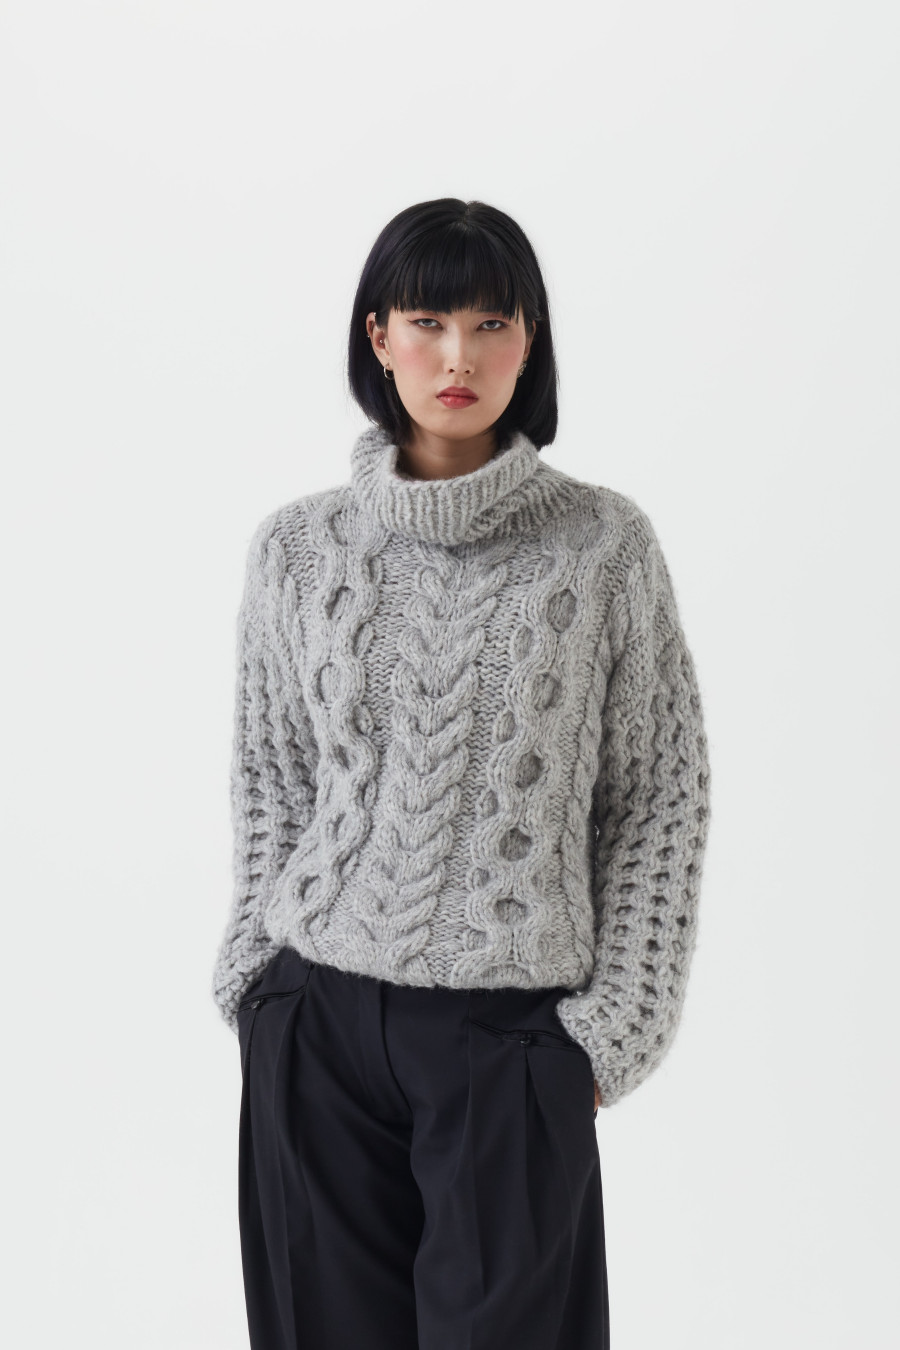 Pullover made of Mohair in Northern Grey (handknit)